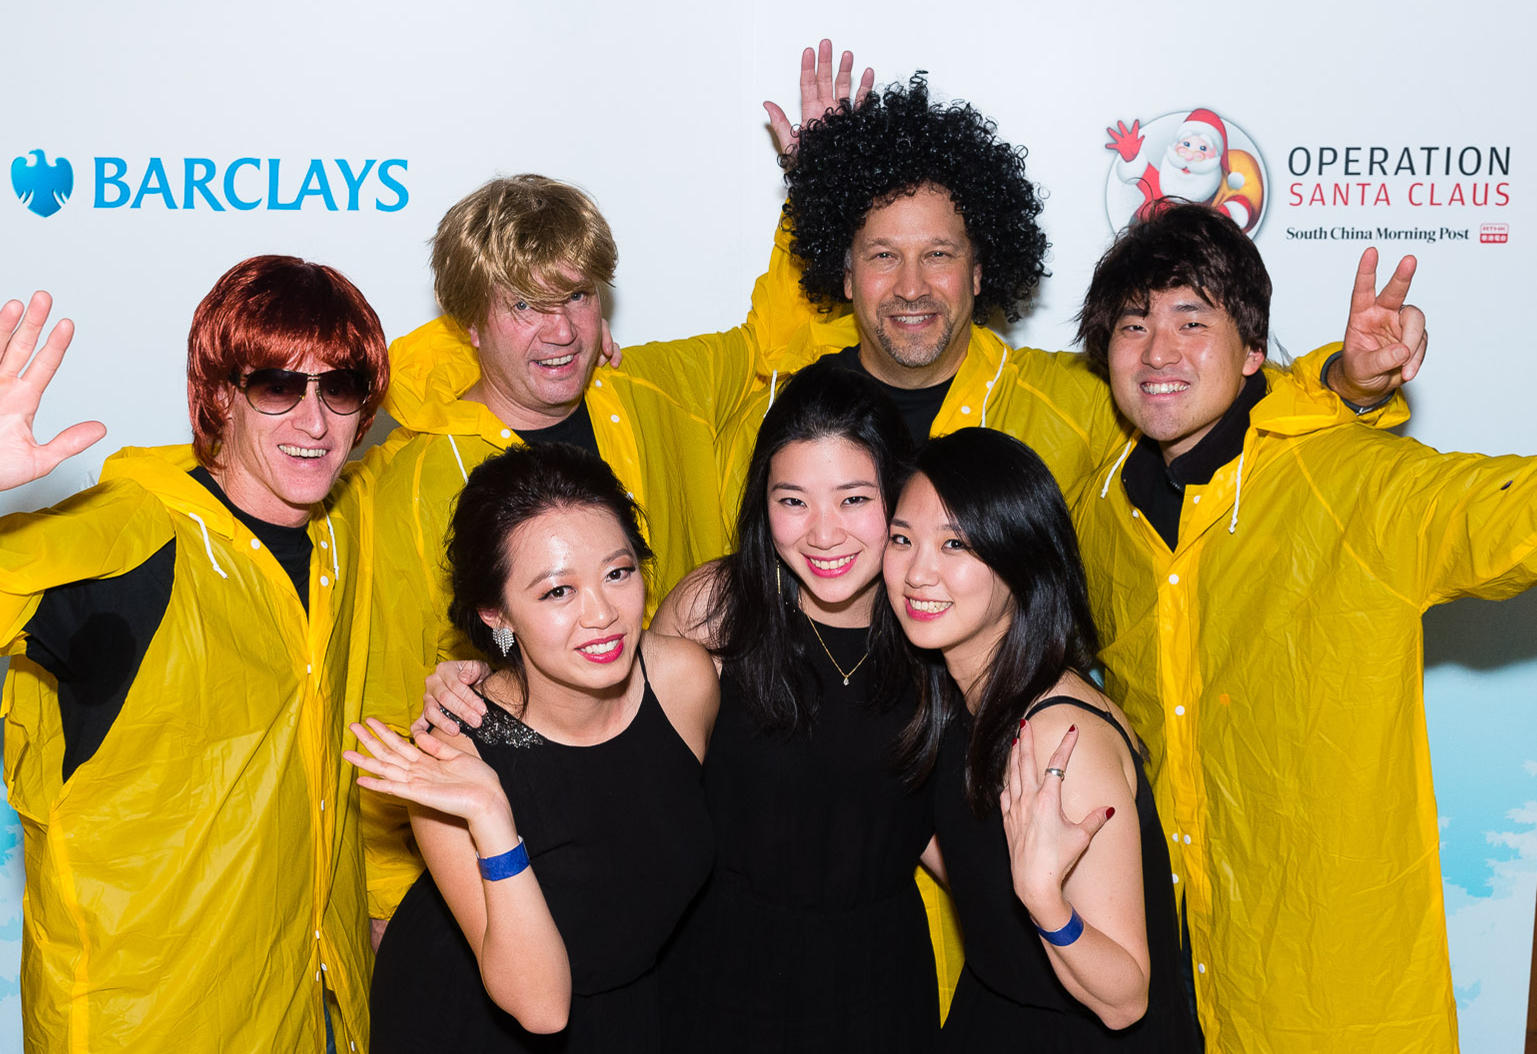 Barclays staff transformed themselves into singers, dancers and musicians in a fun night to raise funds for charity. Photo: SCMP